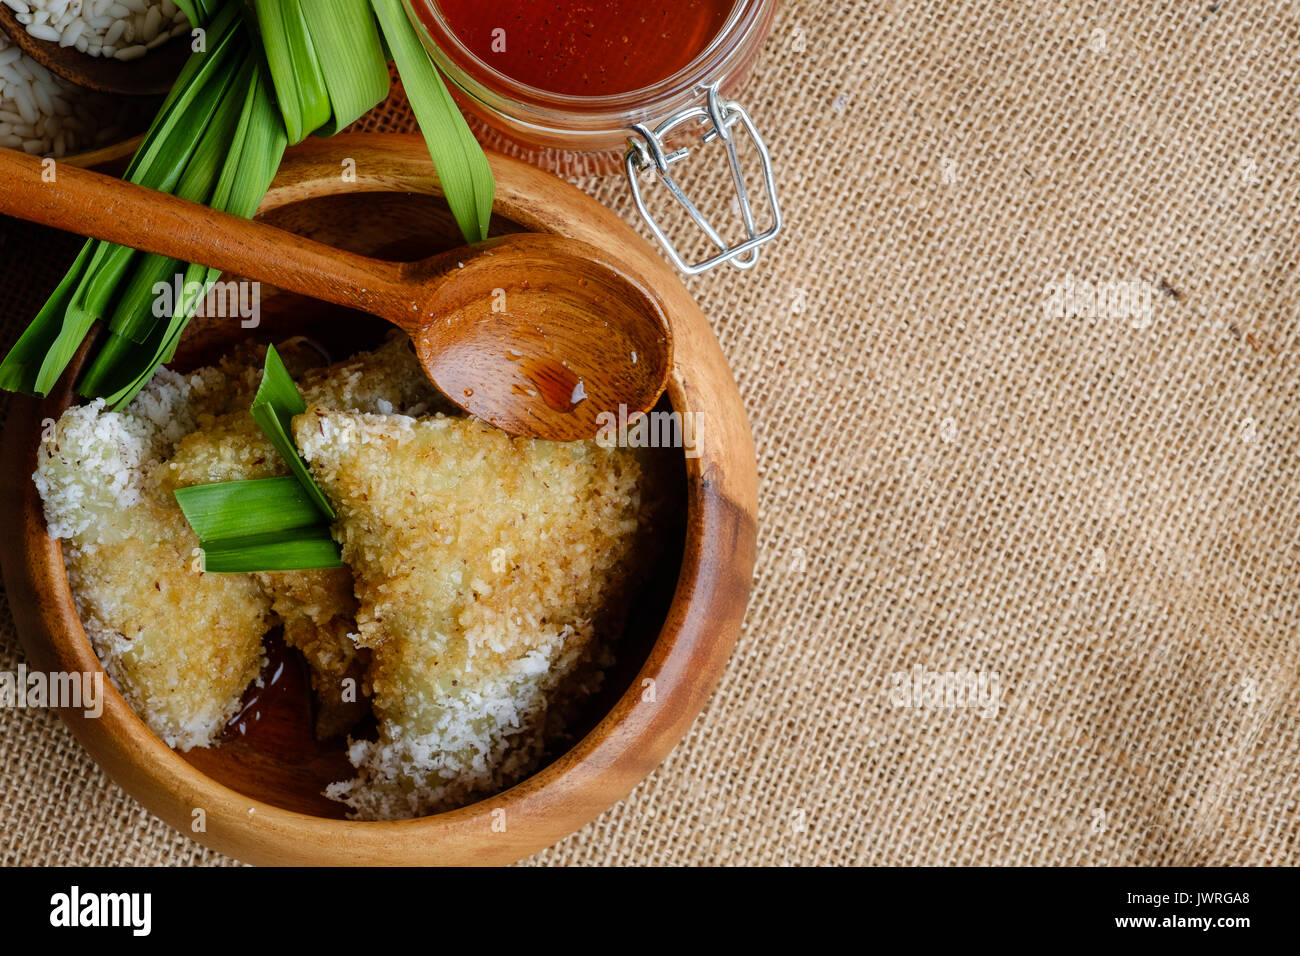 Lupis cake or Kue Lupis from Indonesia in wooden bowl Stock Photo